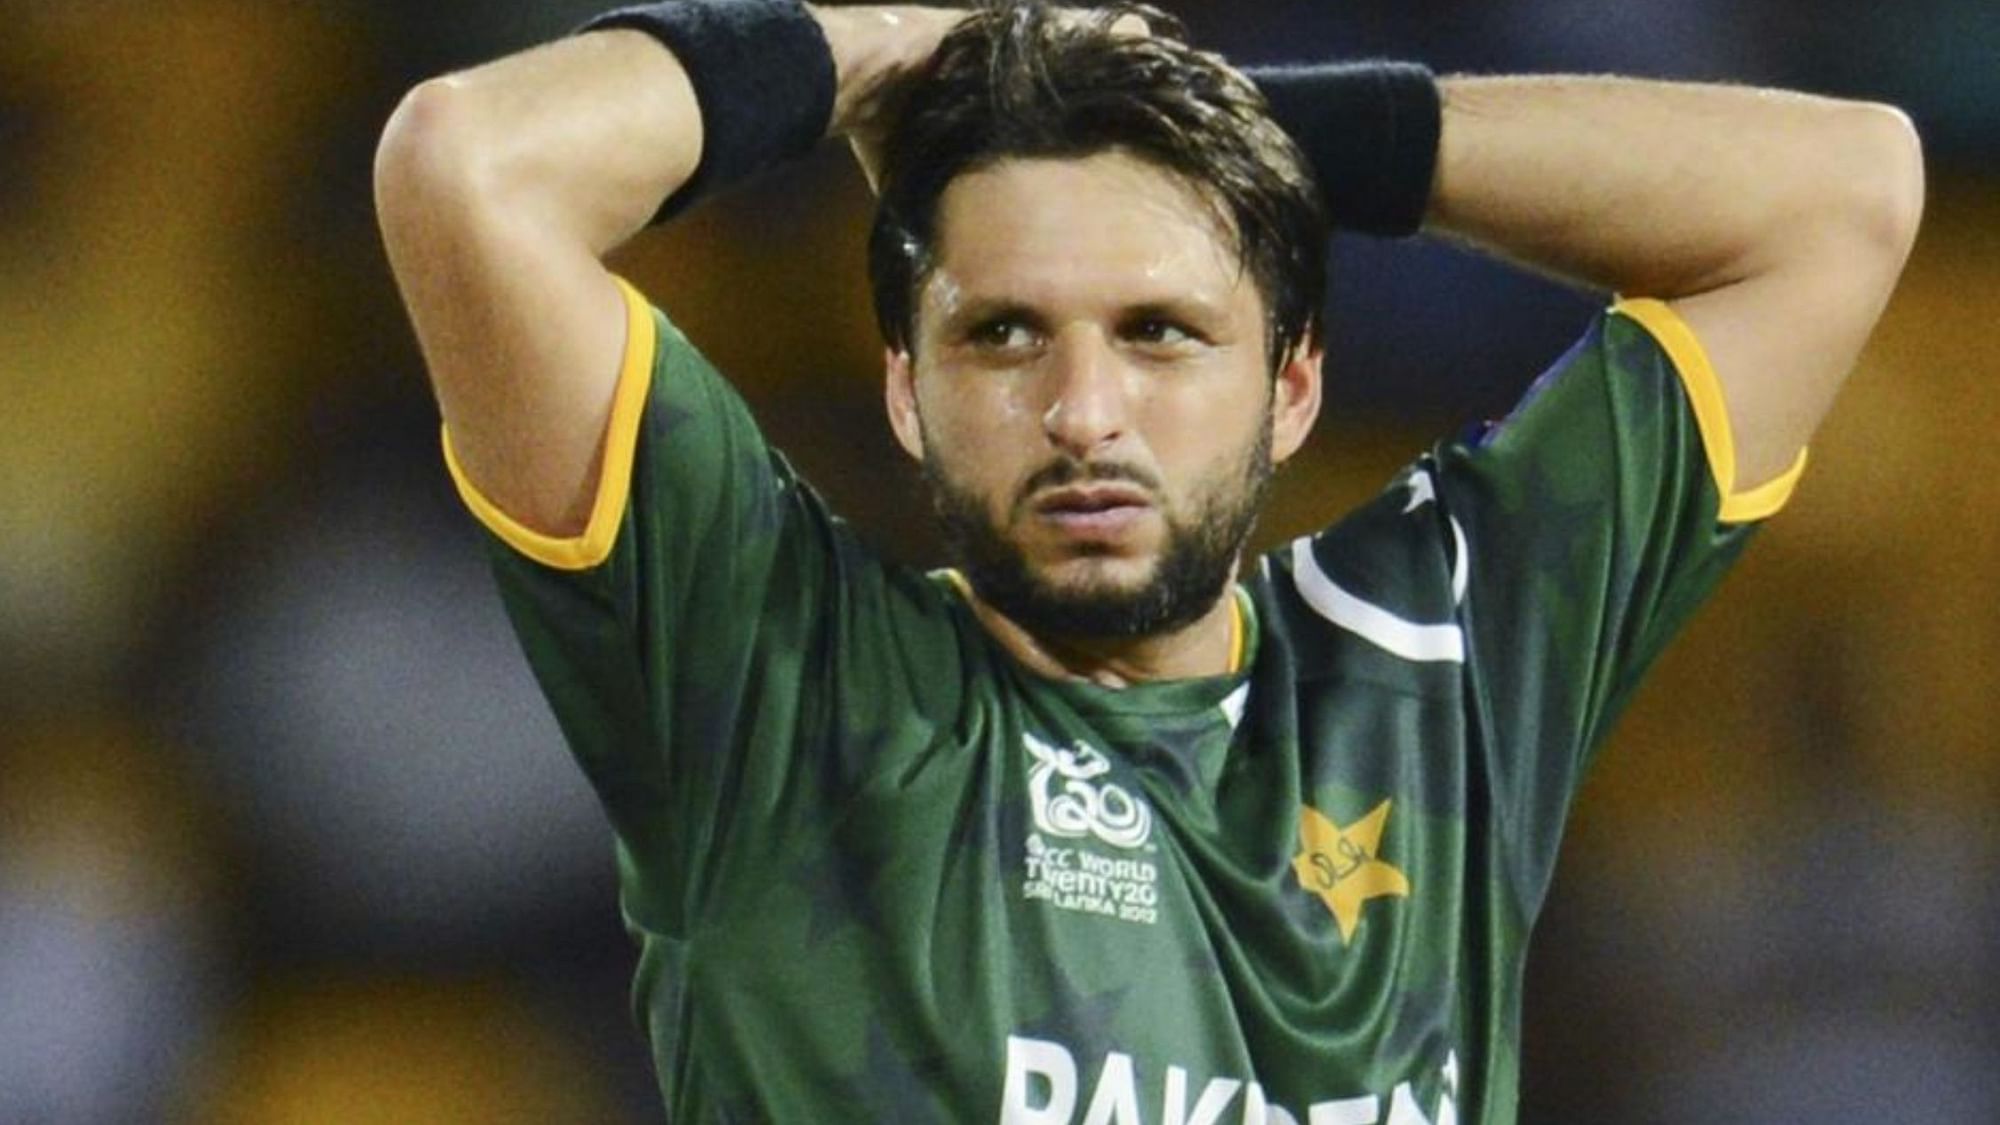 Indian cricketers lashed out at Shahid Afridi following his recent tweet on Kashmir and comment on Prime Minister Narendra Modi.